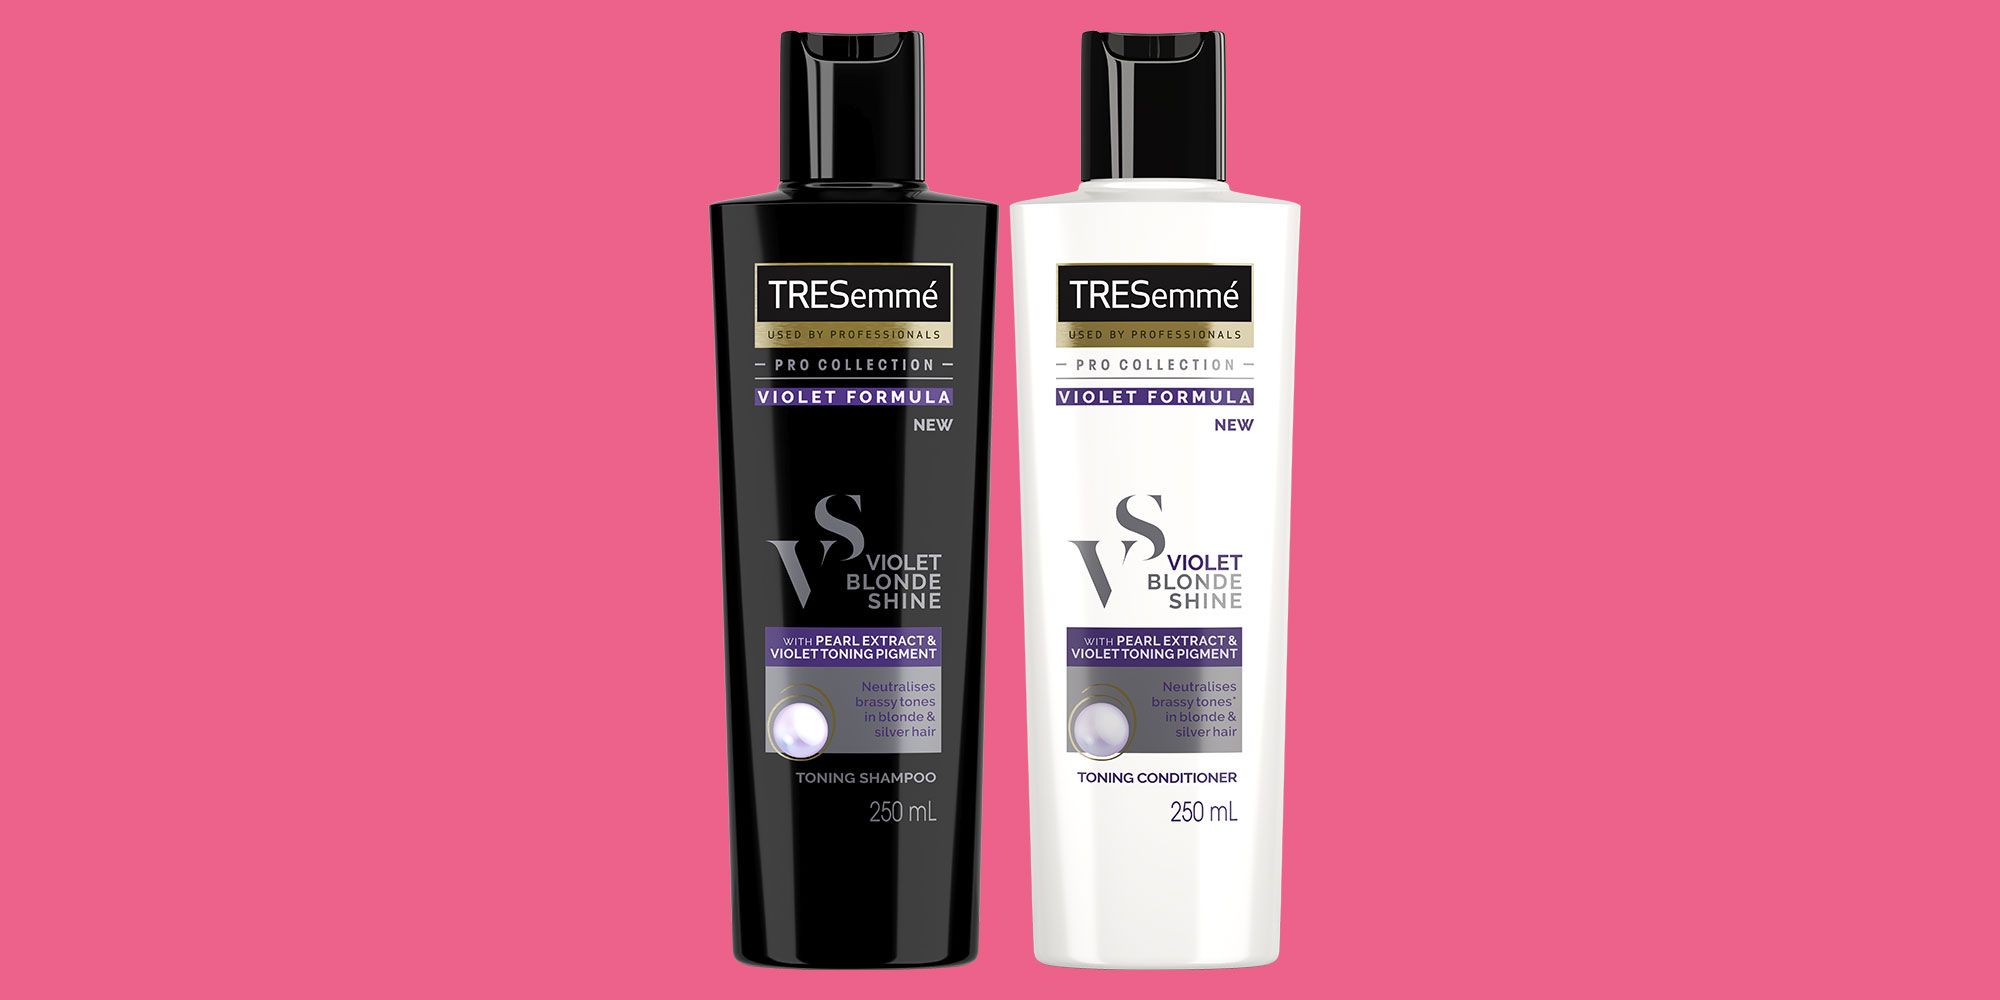 how to apply tresemme conditioner to hair